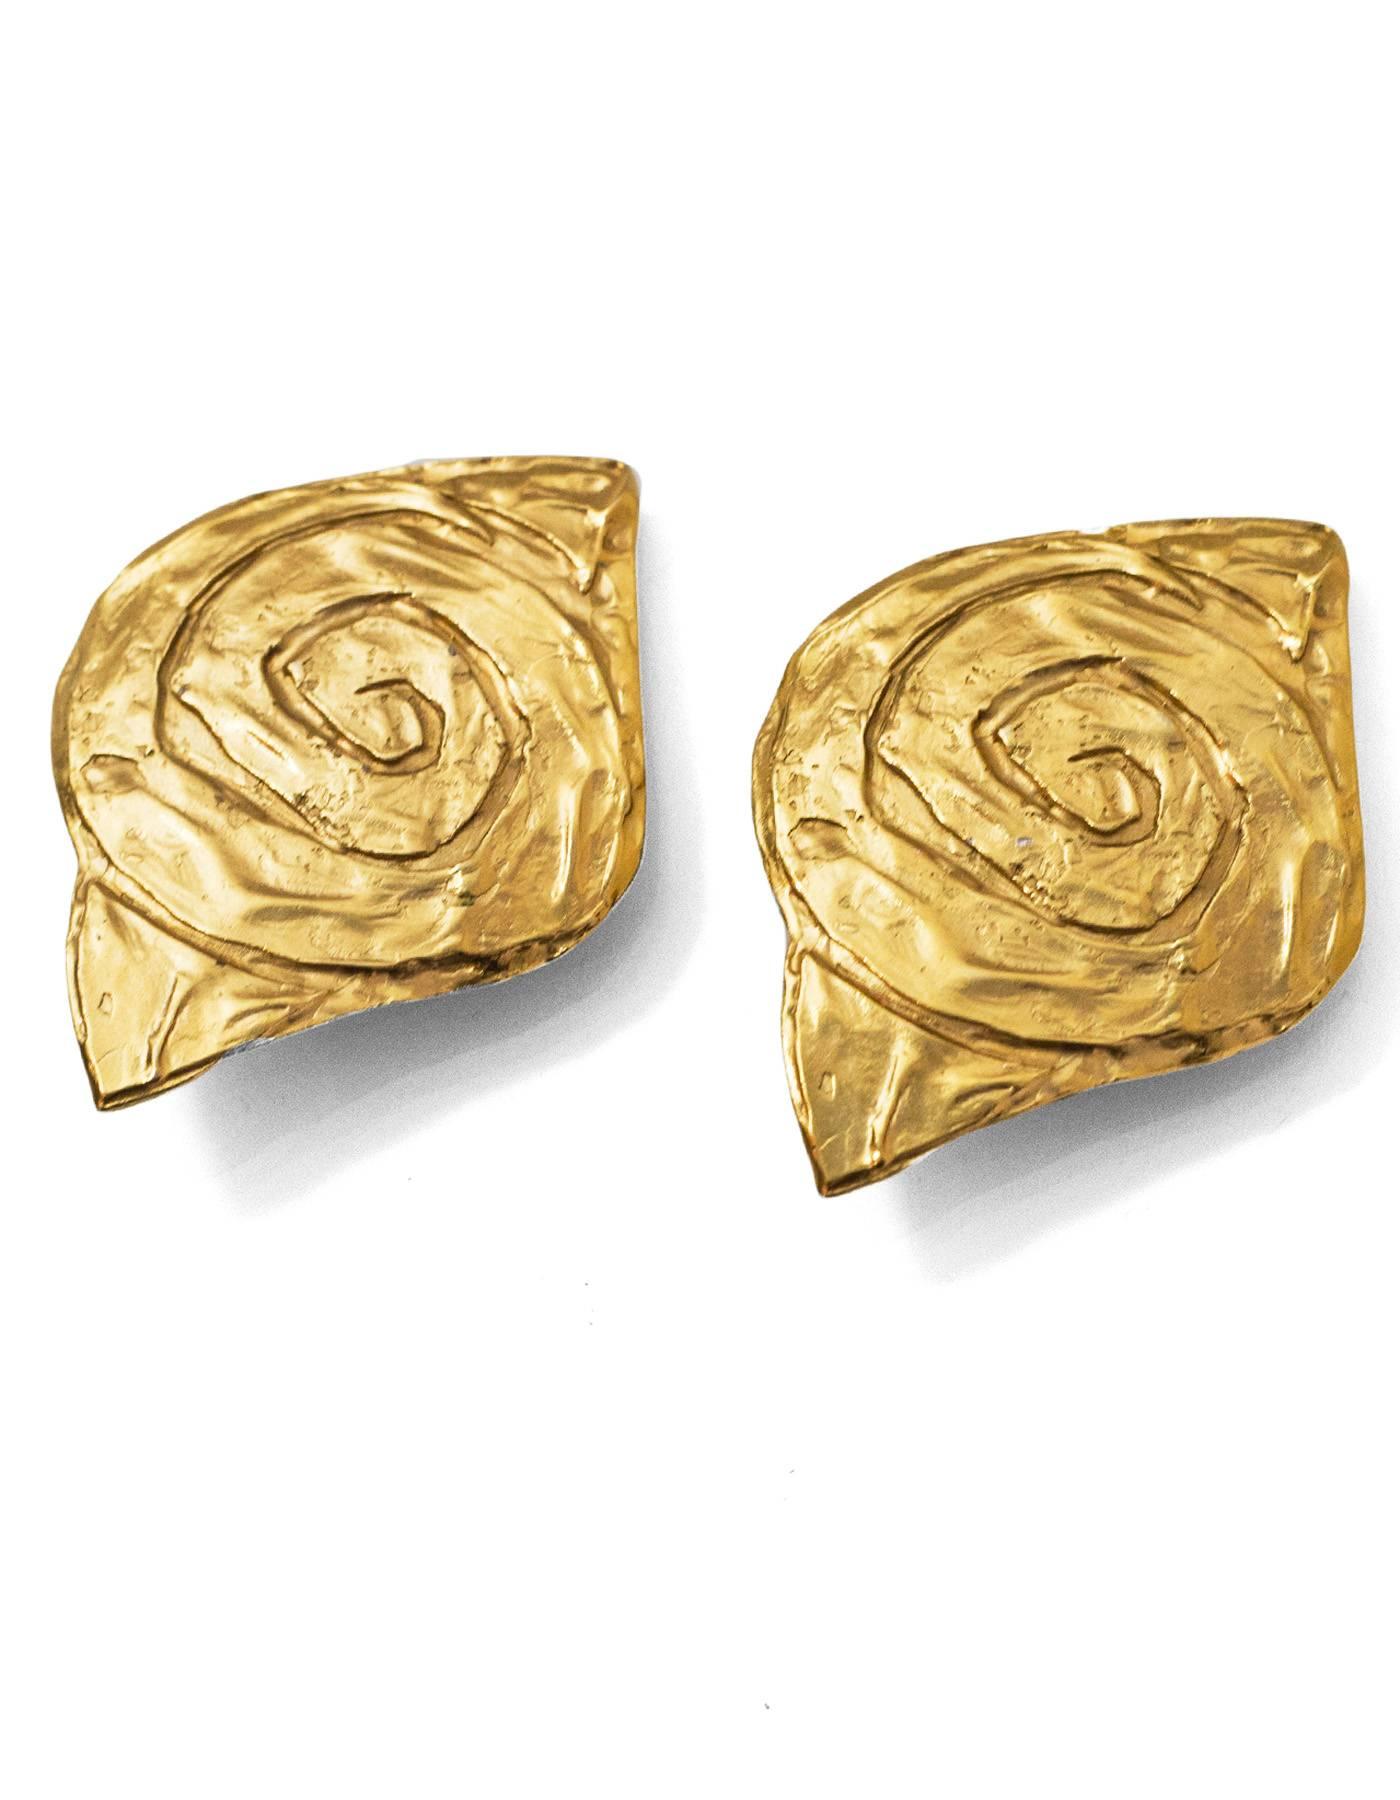 Yves Saint Laurent Vintage Goldtone Rive Gauche Spiral Clip-On Earrings

Made In: France
Color: Gold
Materials: Metal
Closure: Clip-on
Overall Condition: Excellent vintage pre-owned condition

Measurements: 
Length: 2.75